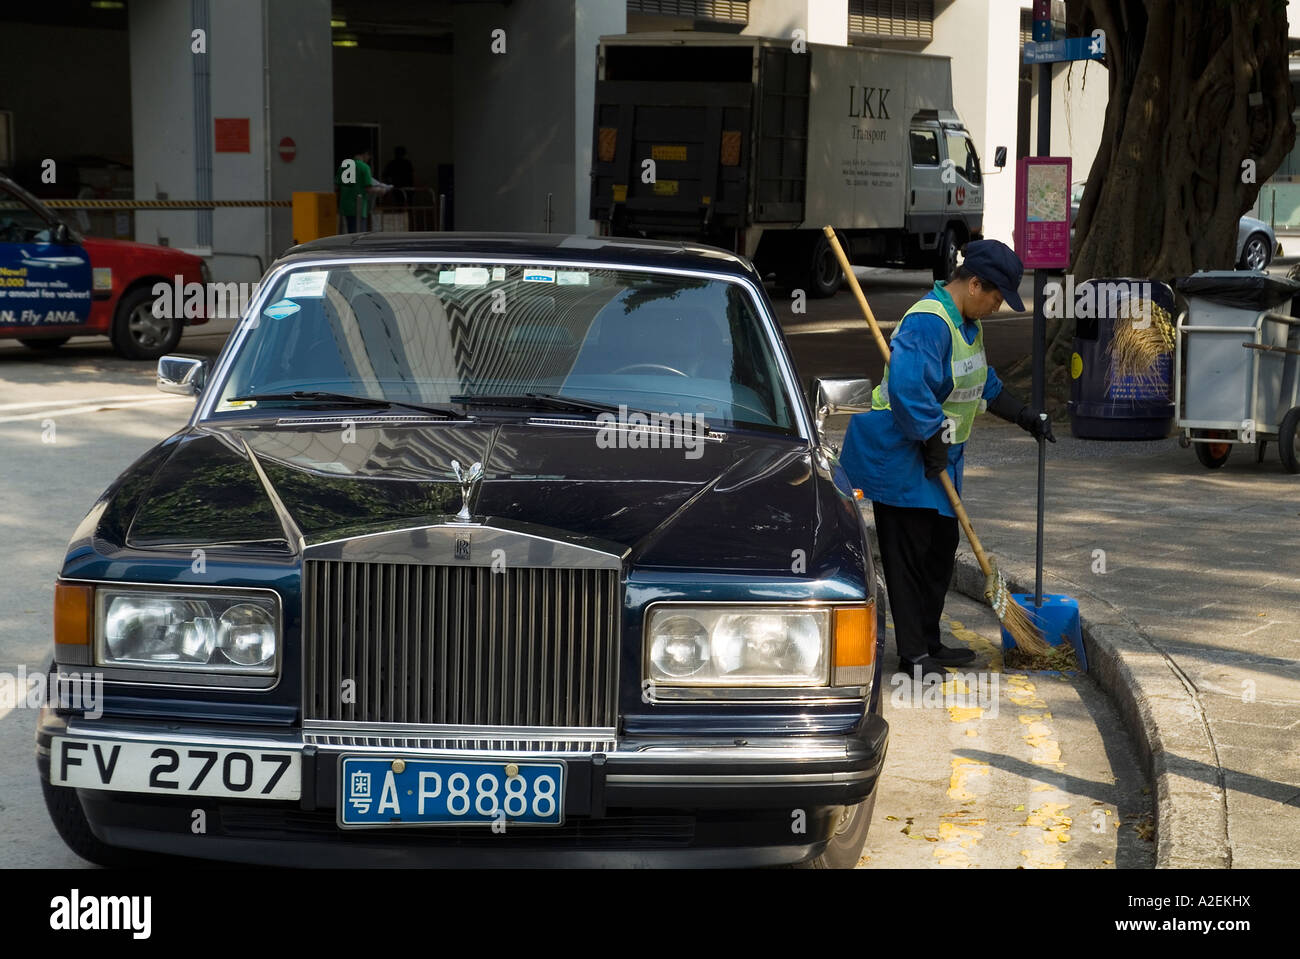 dh  CENTRAL HONG KONG Rolls Royce Chinese licence plates street cleaner luxury car expensive china rich poor wealth gap wealthy cars asia inequality Stock Photo